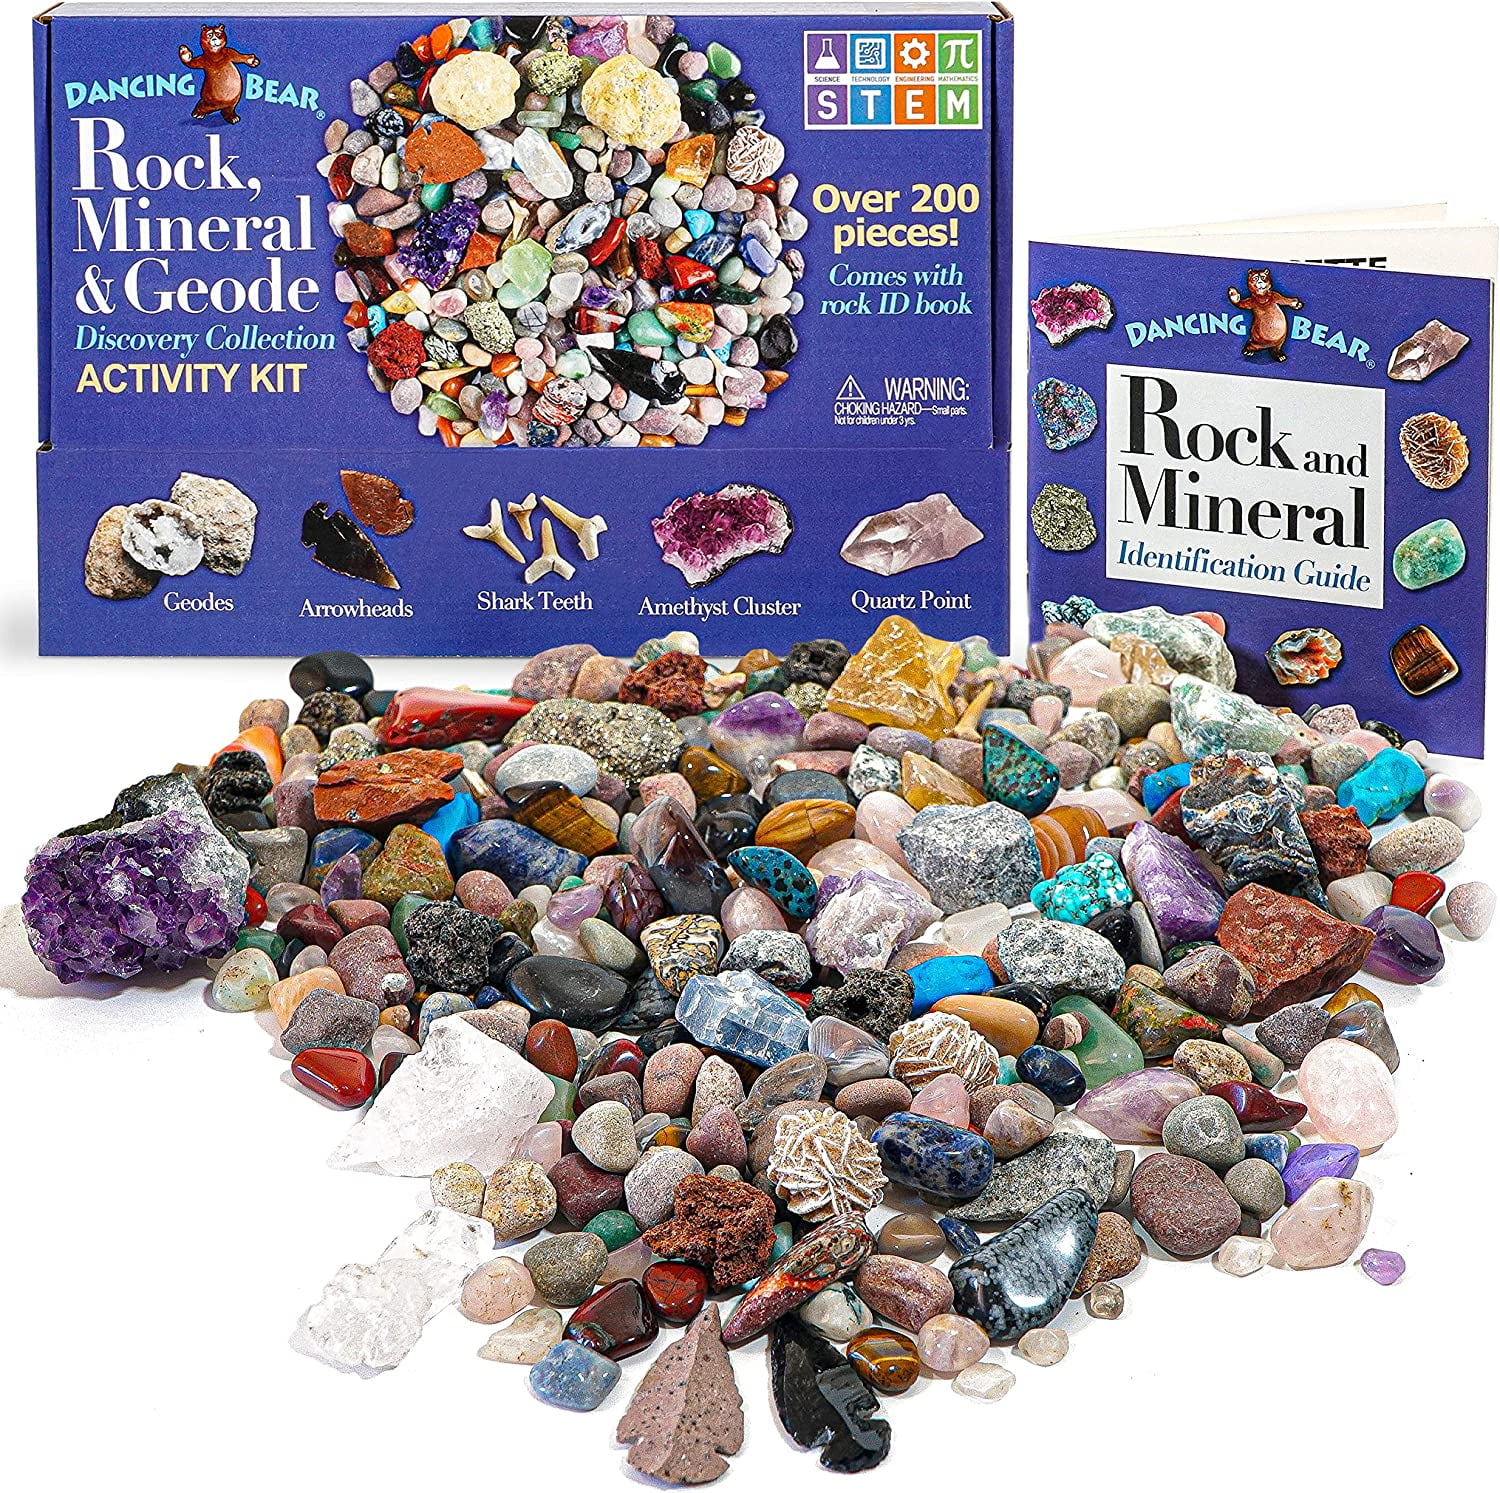 Mineral & Fossil Collection Activity Kit with ID Sheet & Rock Book Shark’s Tooth in Matrix Dancing Bear Rock Plus Ammonite Fossilized Poo 2 Geodes & Arrowheads, Over 125 pcs and NO Gravel Brand 